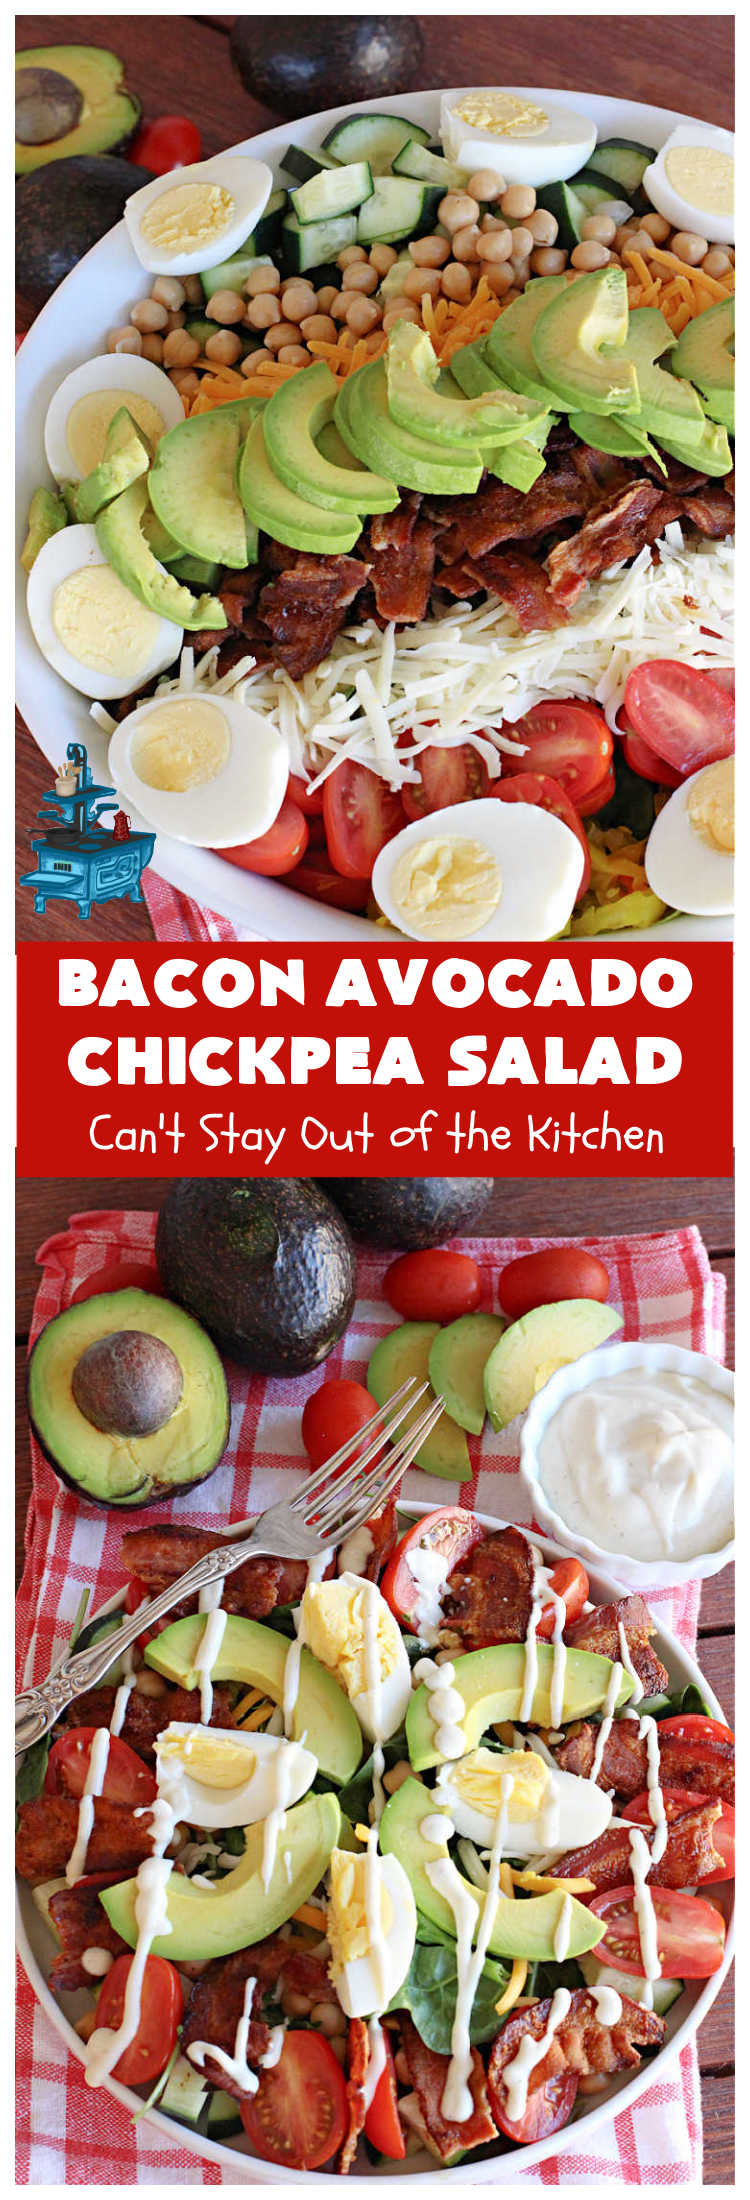 Bacon Avocado Chickpea Salad | Can't Stay Out of the Kitchen